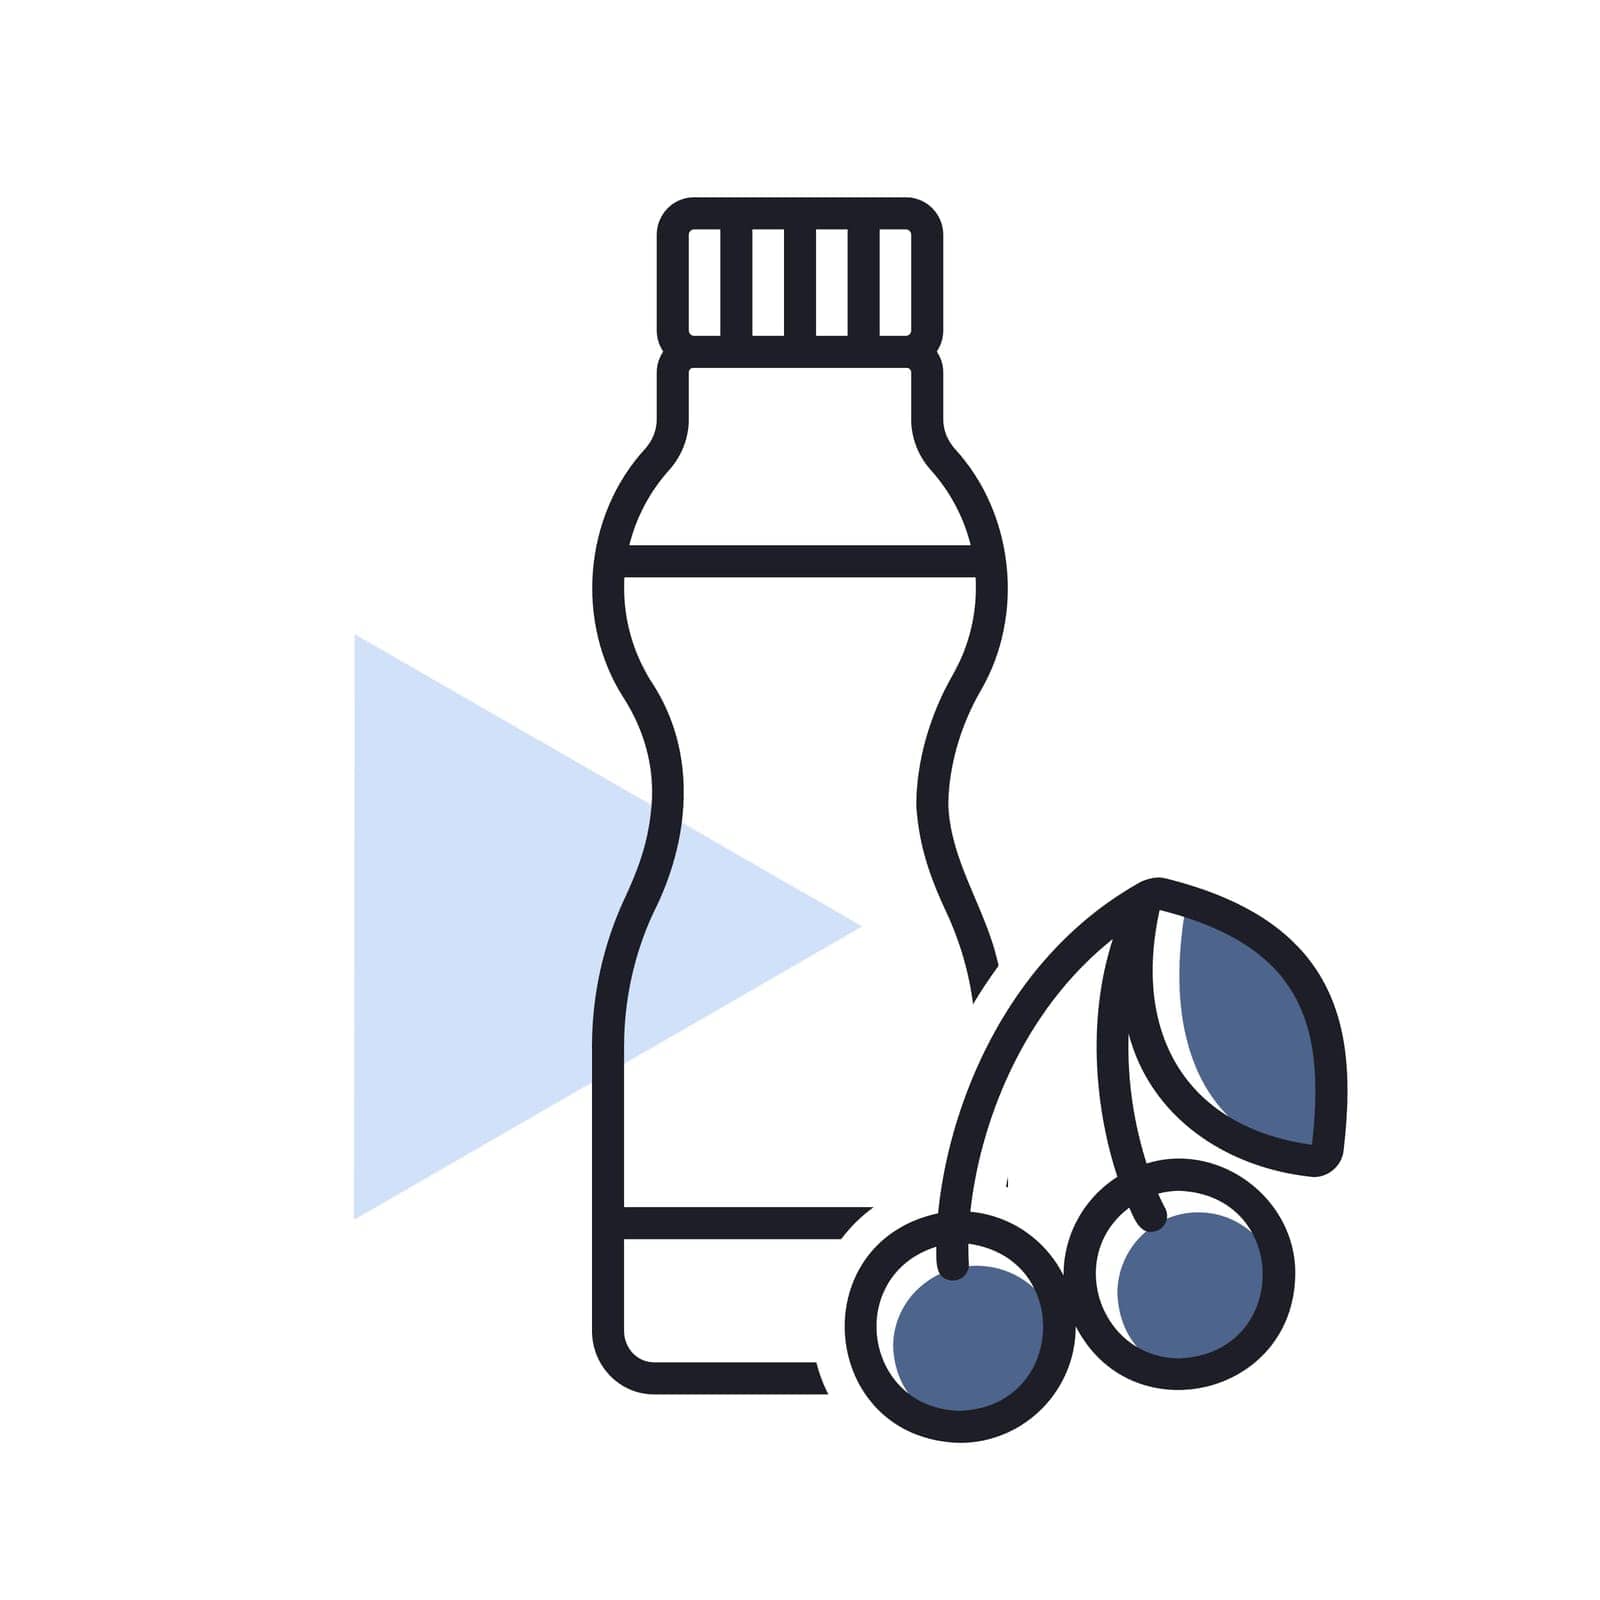 Yoghurt bottle with flavor cherry vector icon by nosik